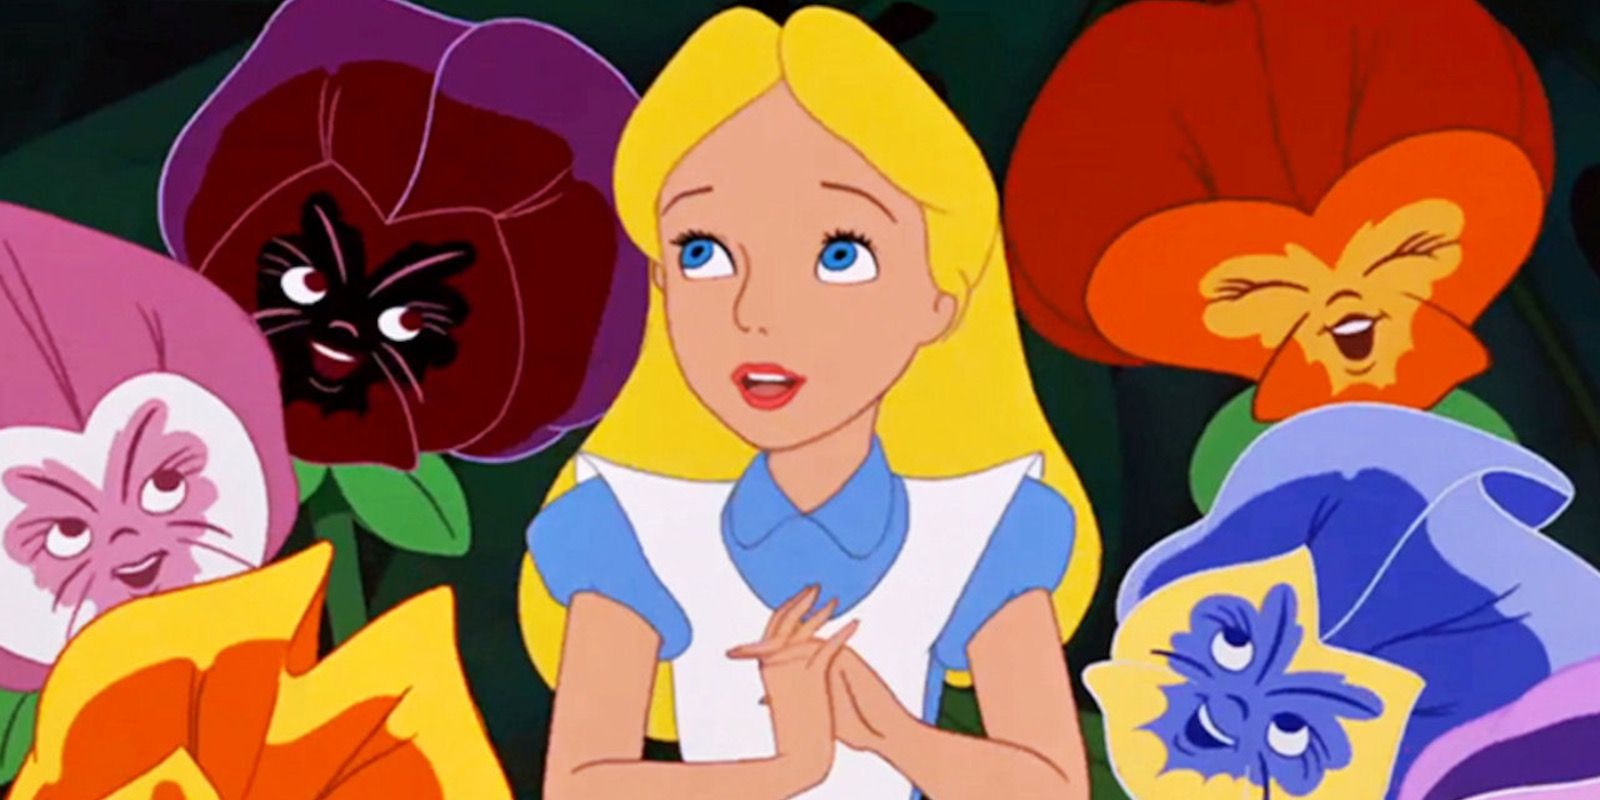 Disney: D&D Moral Alignments Of Alice In Wonderland Characters